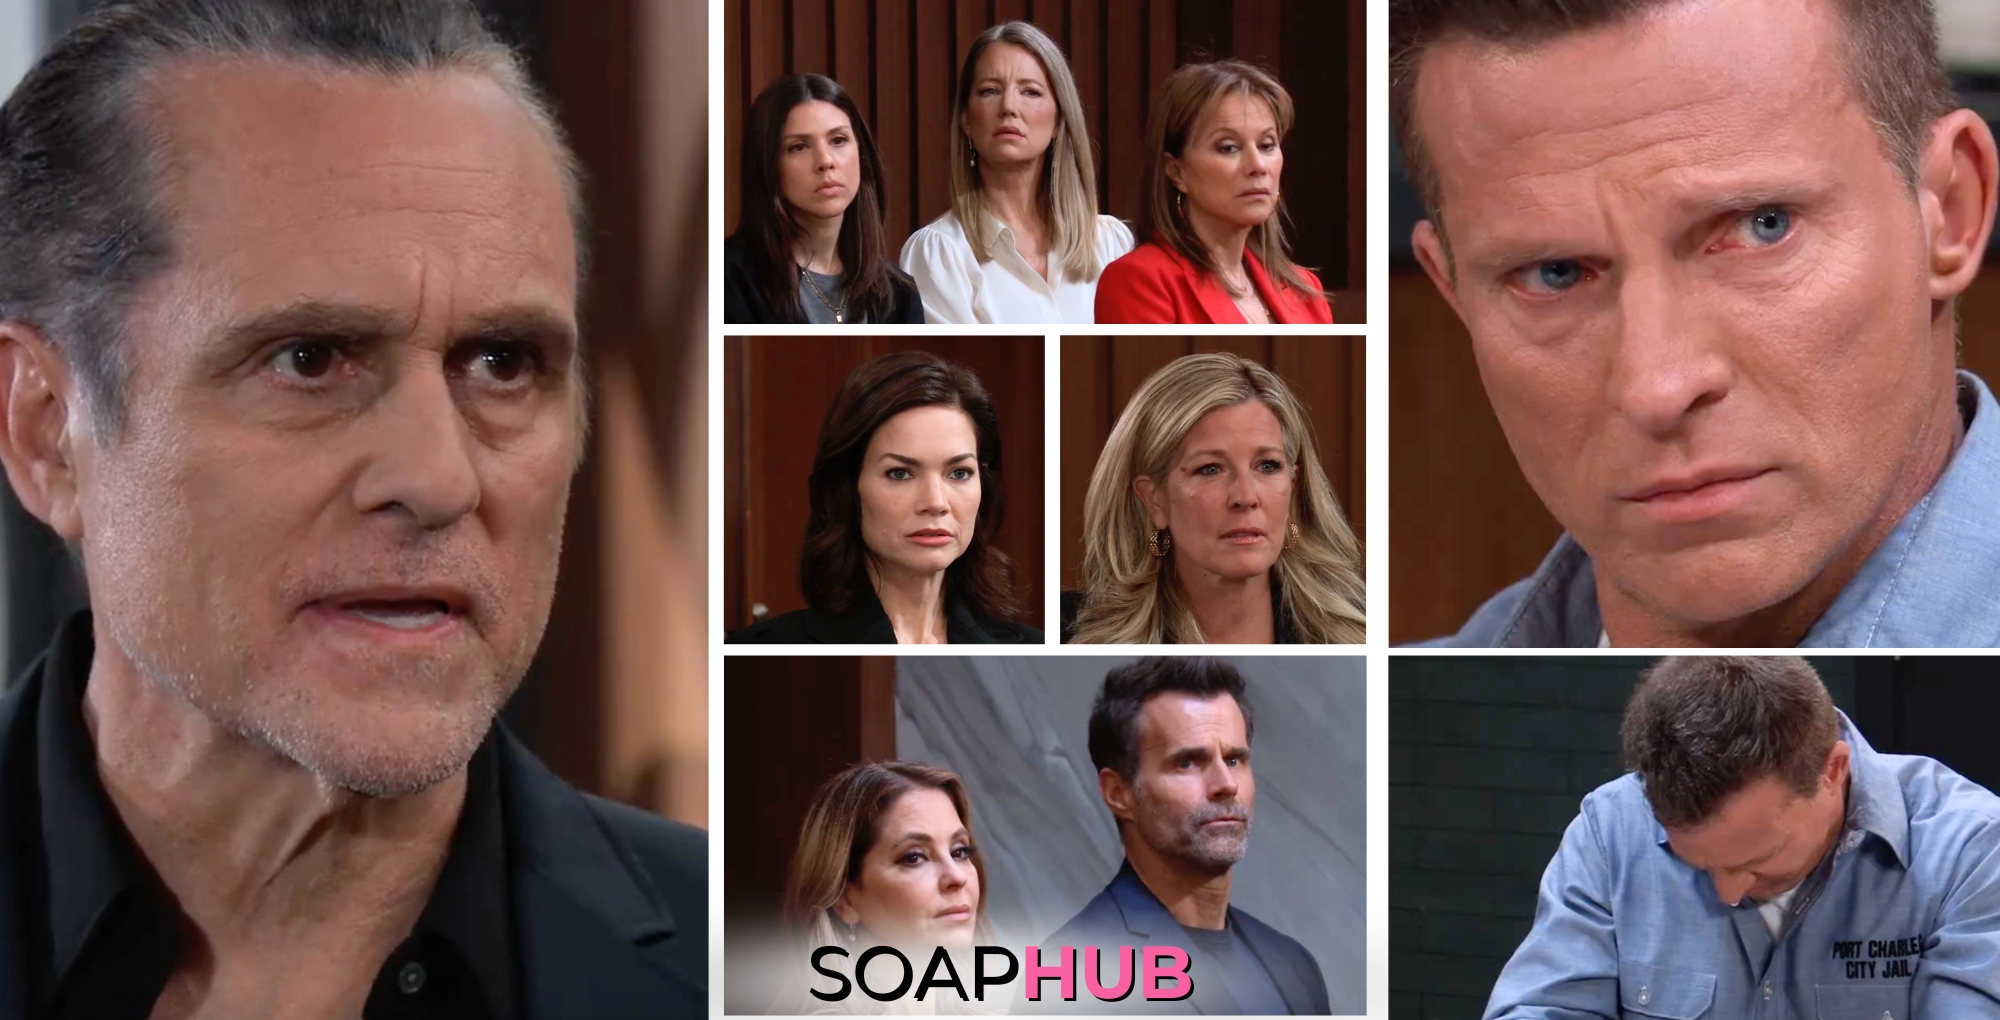 In the General Hospital spoilers for March 28, 2024, episode 15436, Jason's Arraignment stars and Sonny experiences doubts with Soap Hub logo across the bottom.